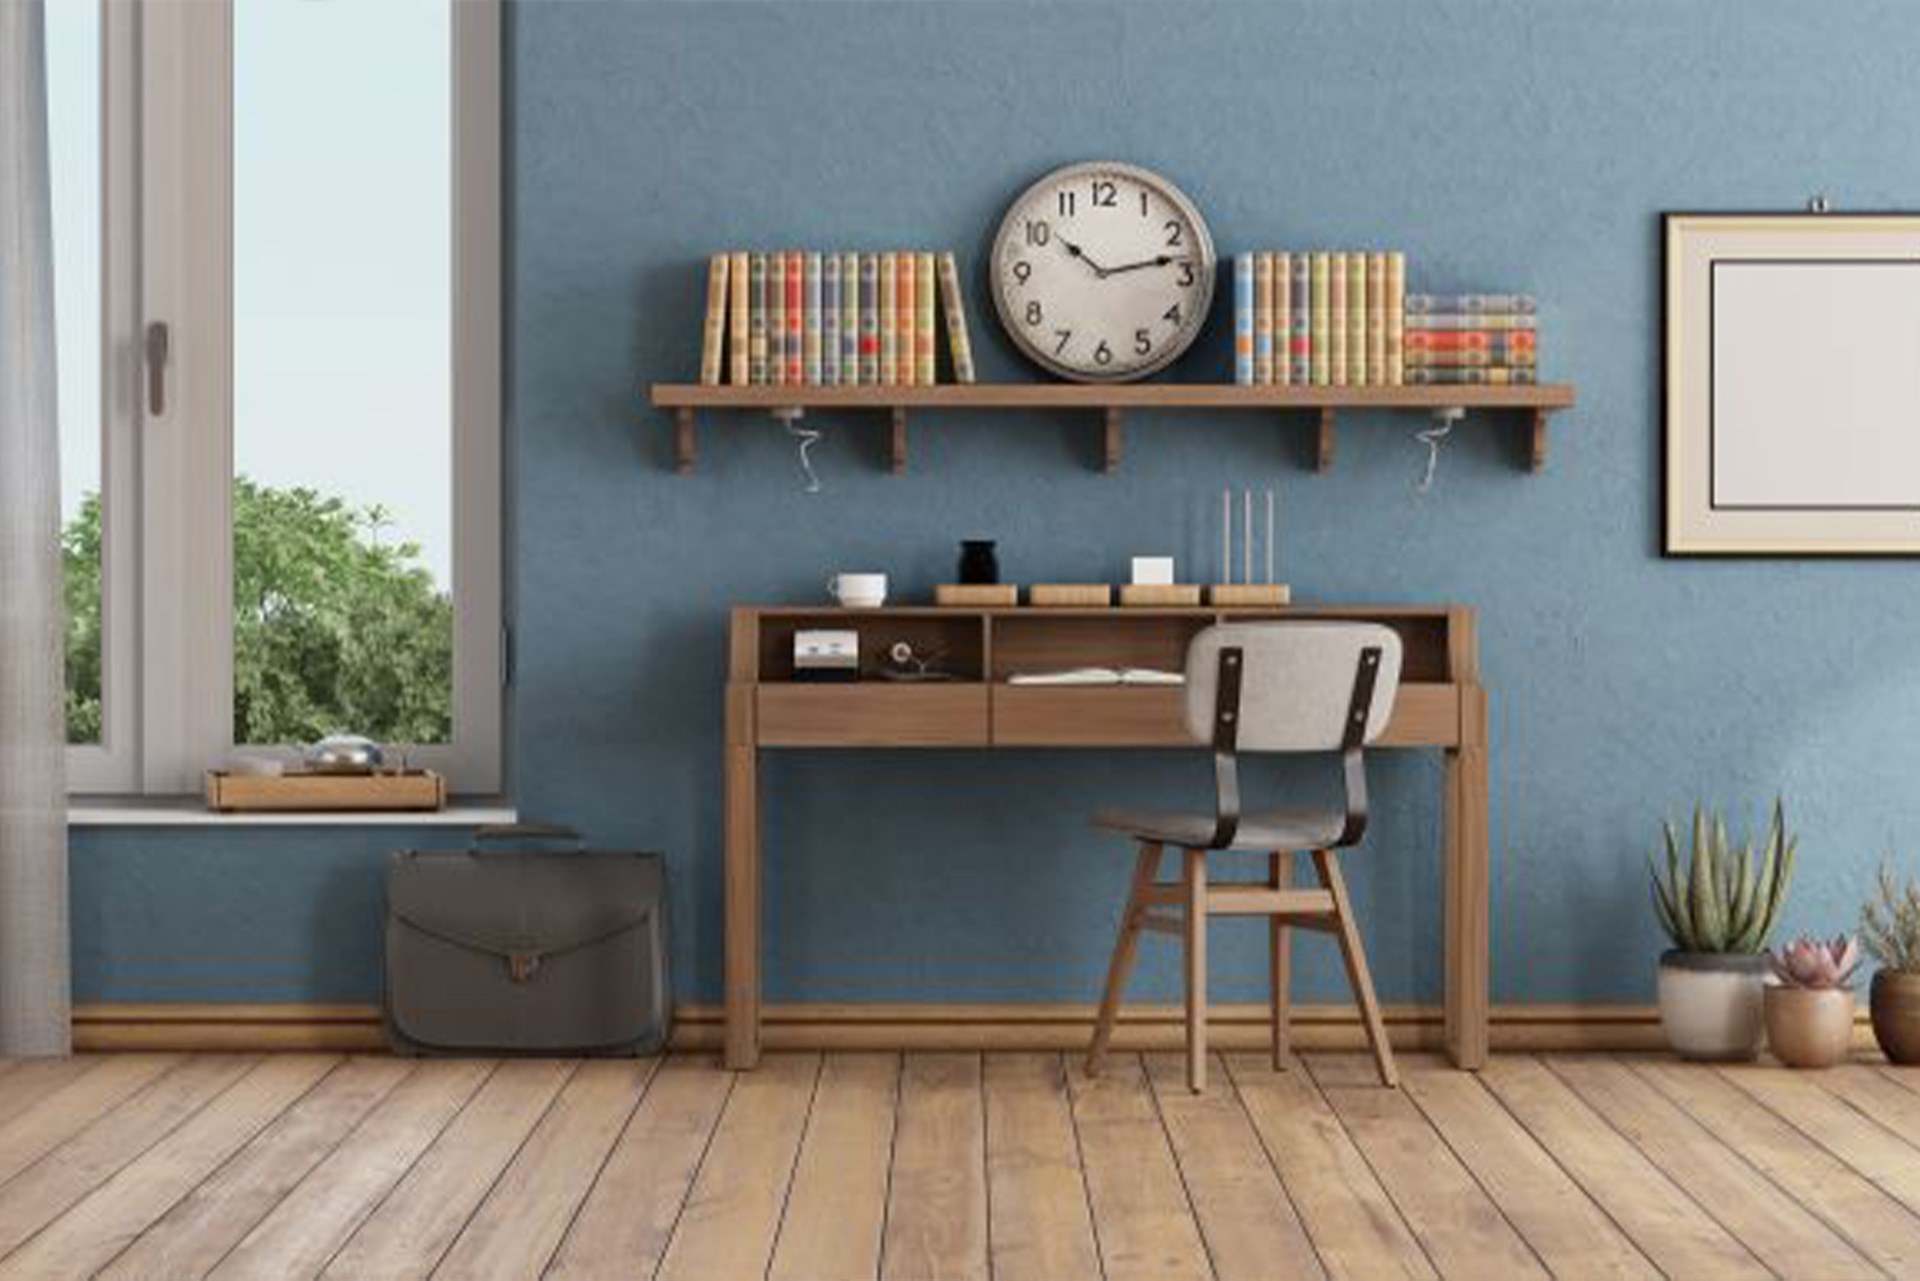 No1 Property Guide’s Home Office Ideas